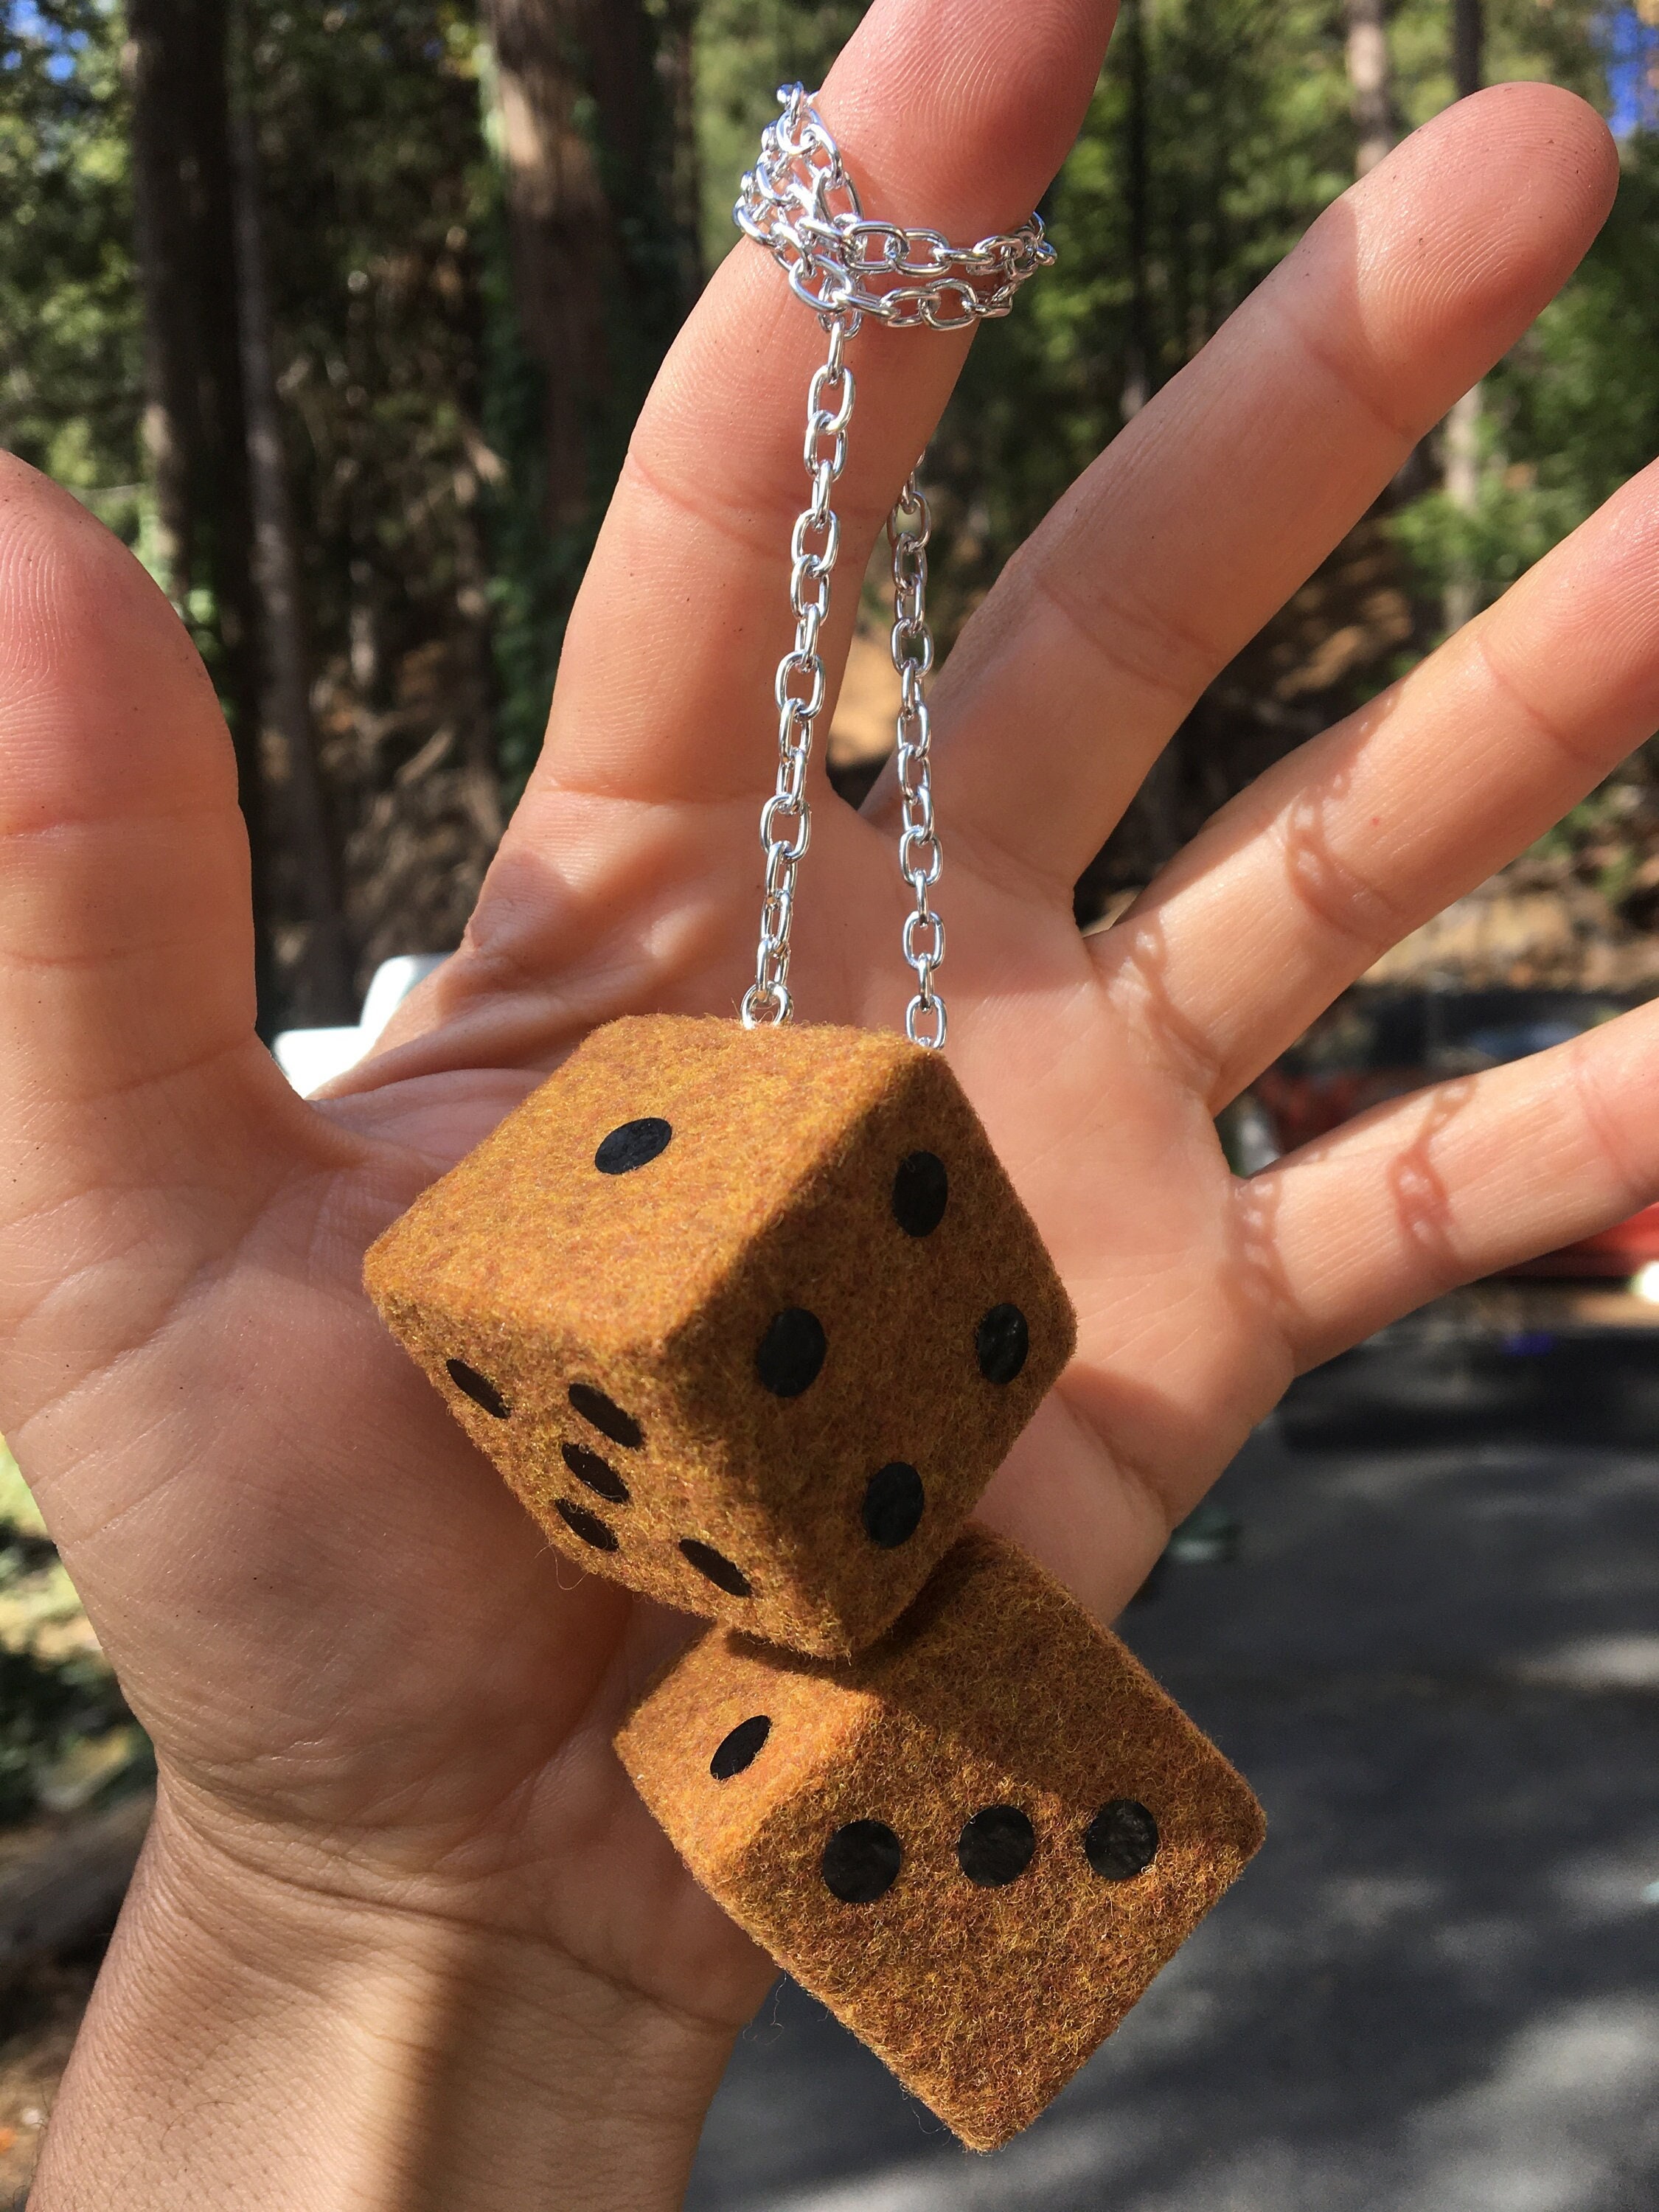 Copper Canyon / Brown Fuzzy Dice With Black Dots and Chain or Cord / Car  Accessories, Charms, Gift, Novelty, Mirror Danglers, Car Dice 